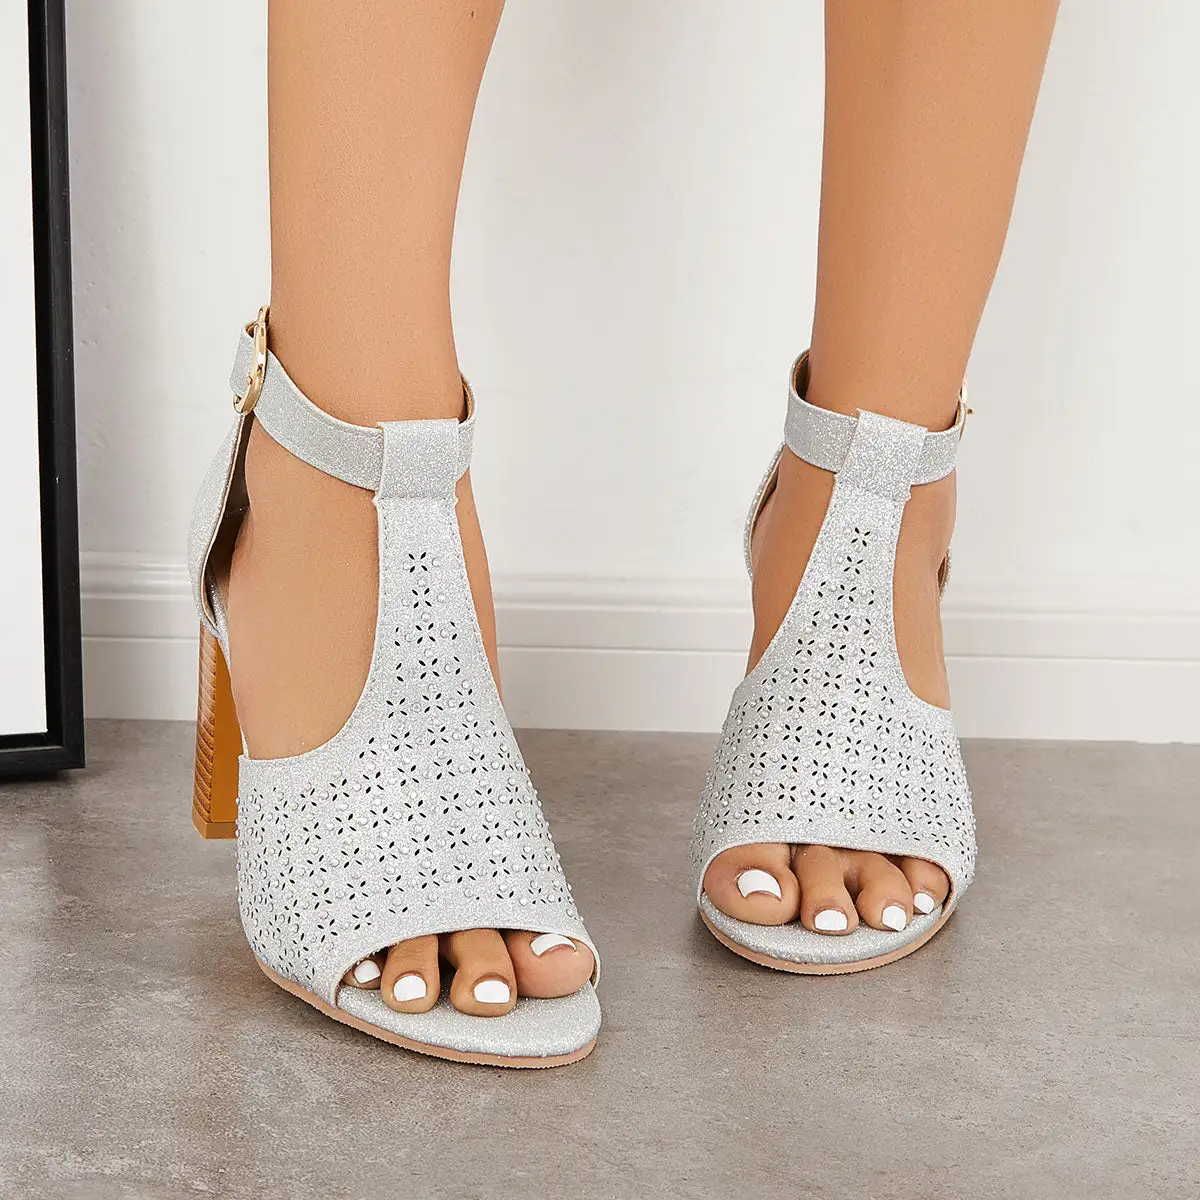 Shiny T-Strap Chunky High Heels Ankle Strap Dress Sandals